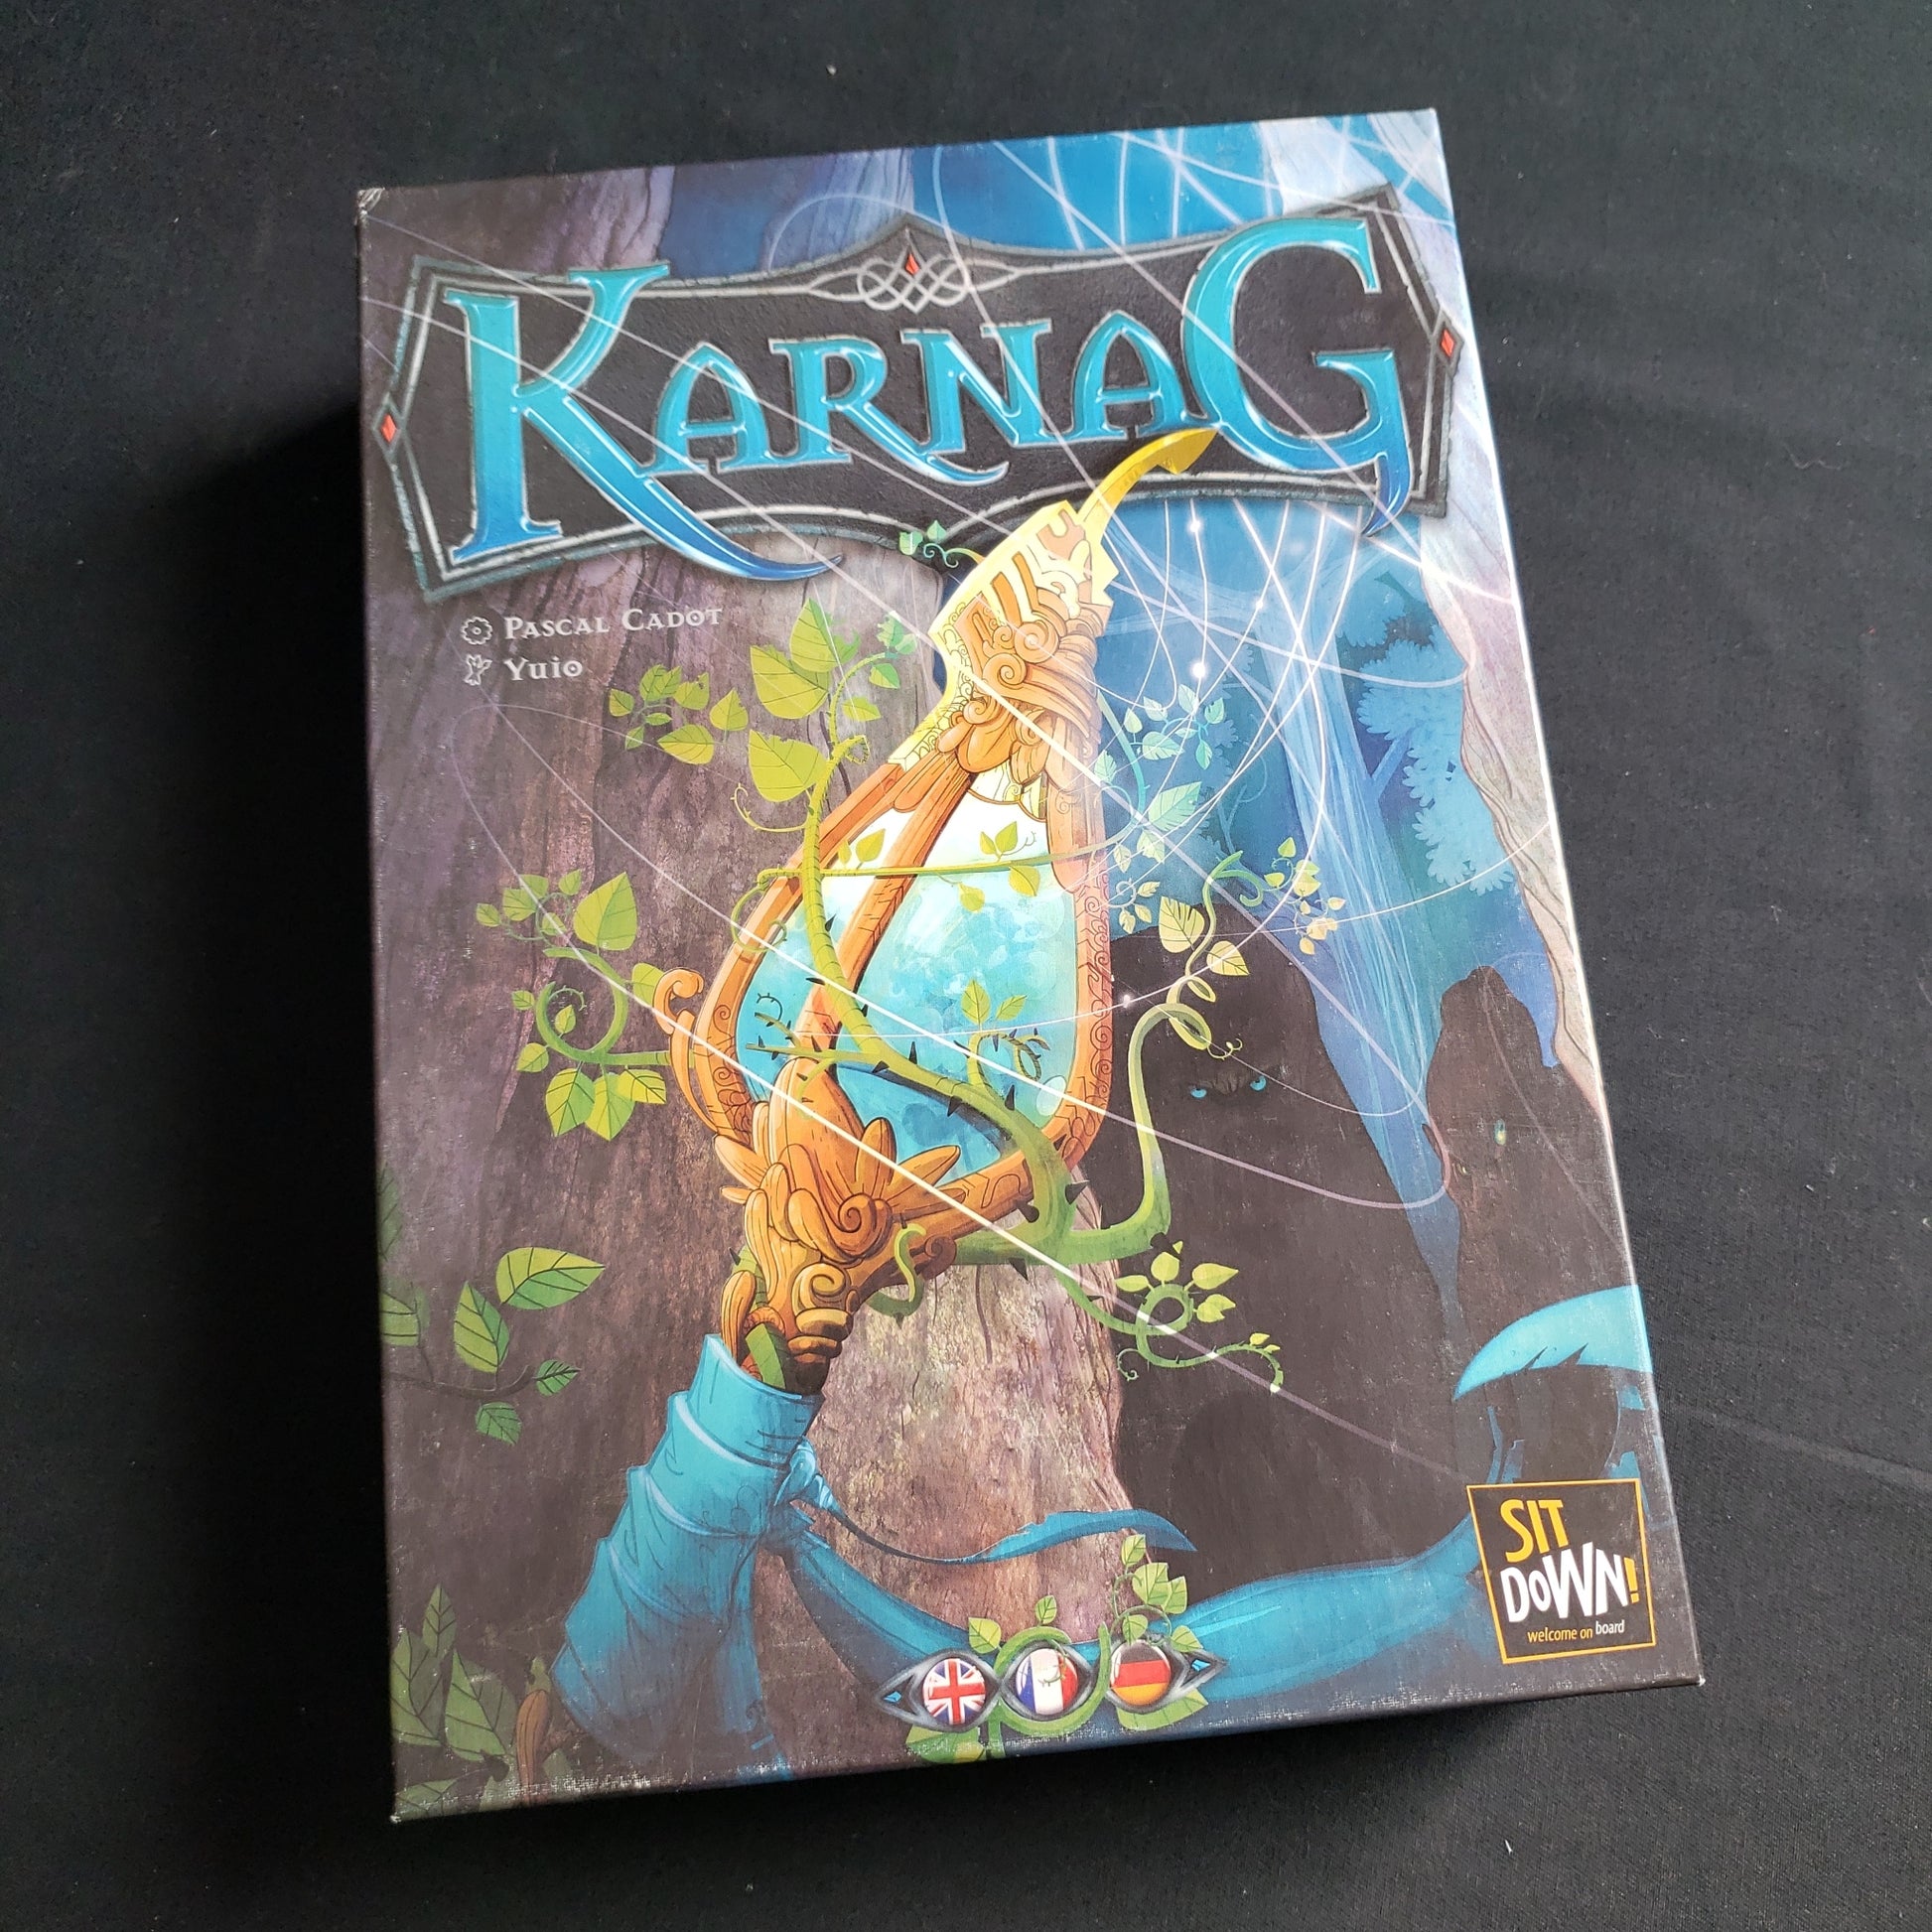 Image shows the front cover of the box of the Karnag board game